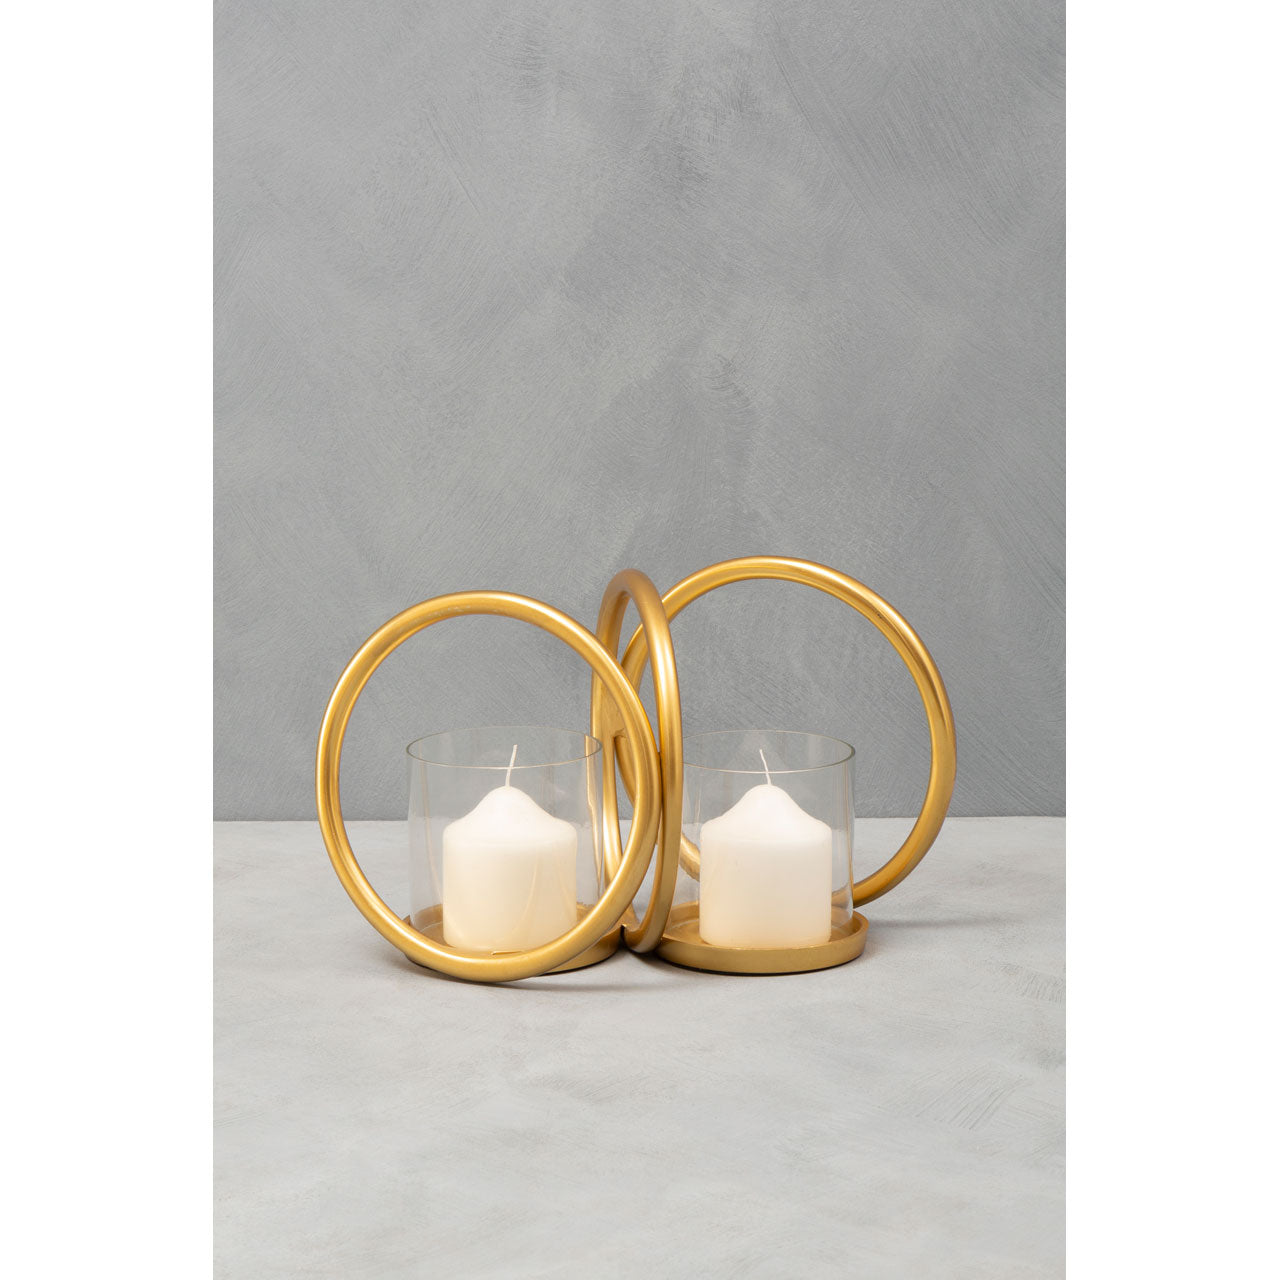  Premier-Olivia's Boutique Hotel Collection - Double Ring Gold Candle Holder-Gold 485 